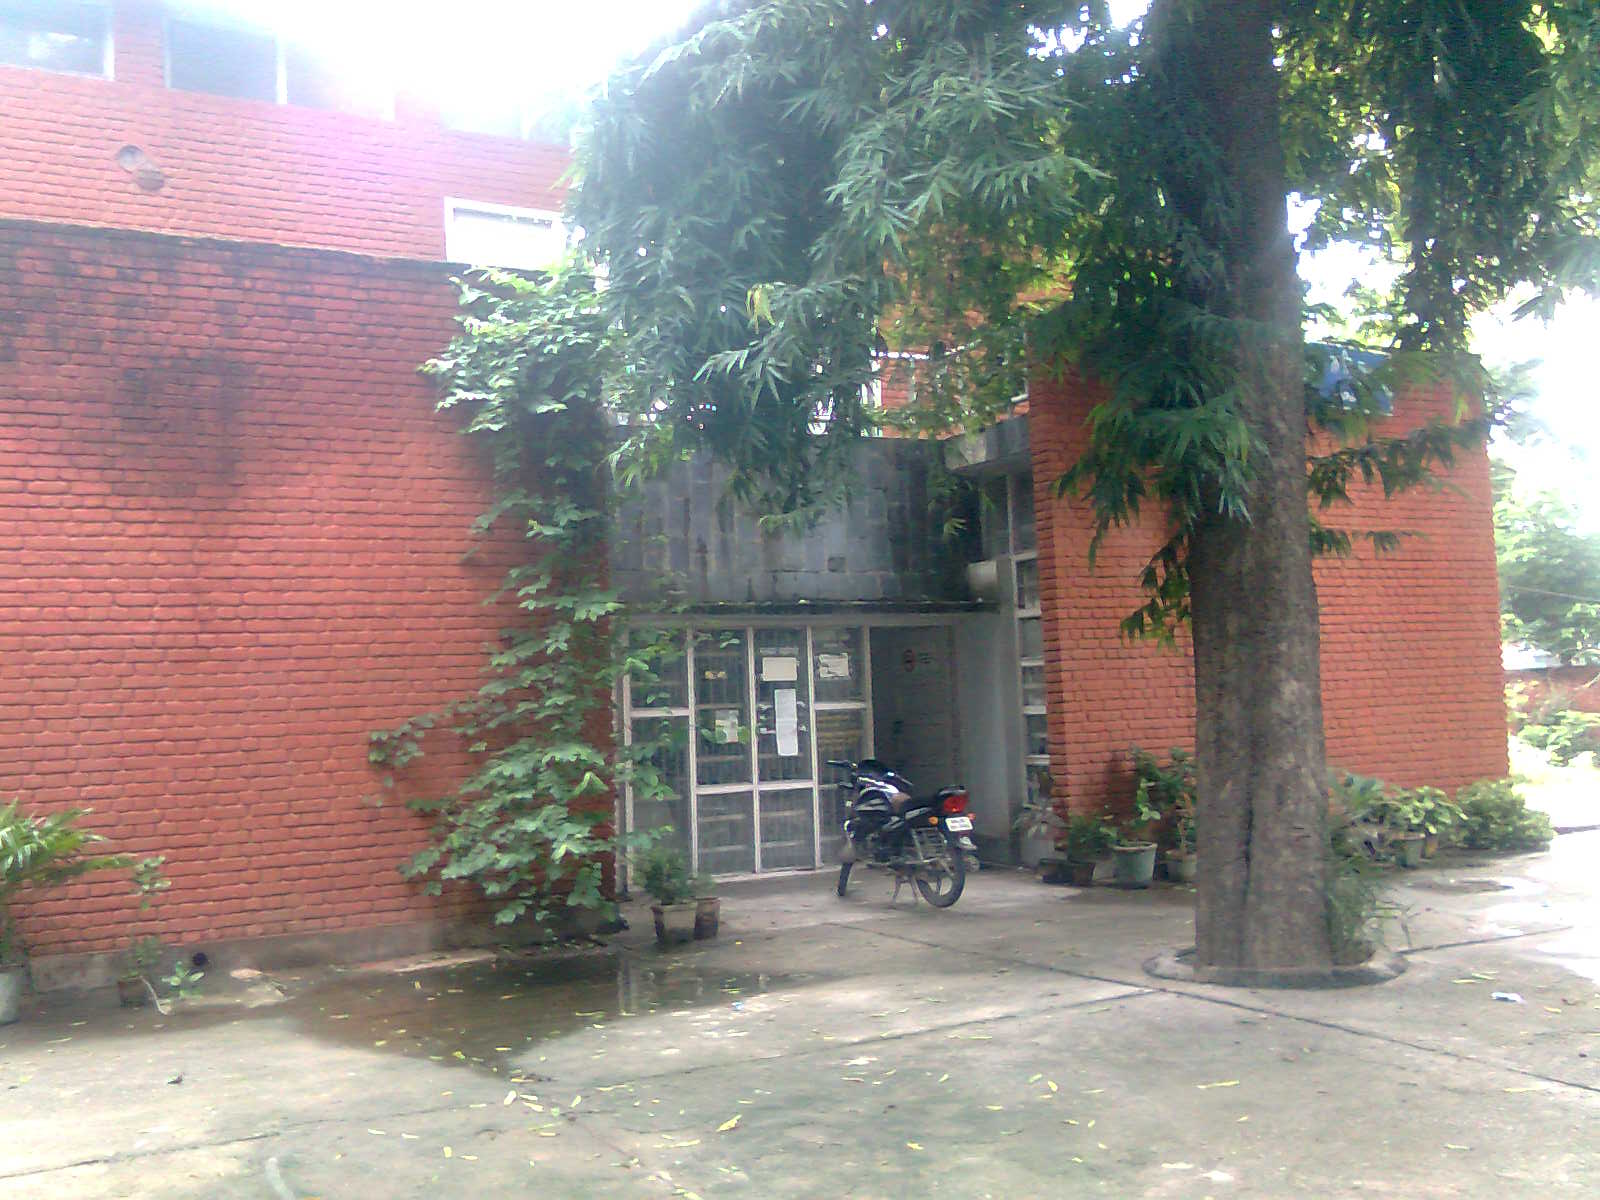 District Library, Gurgaon